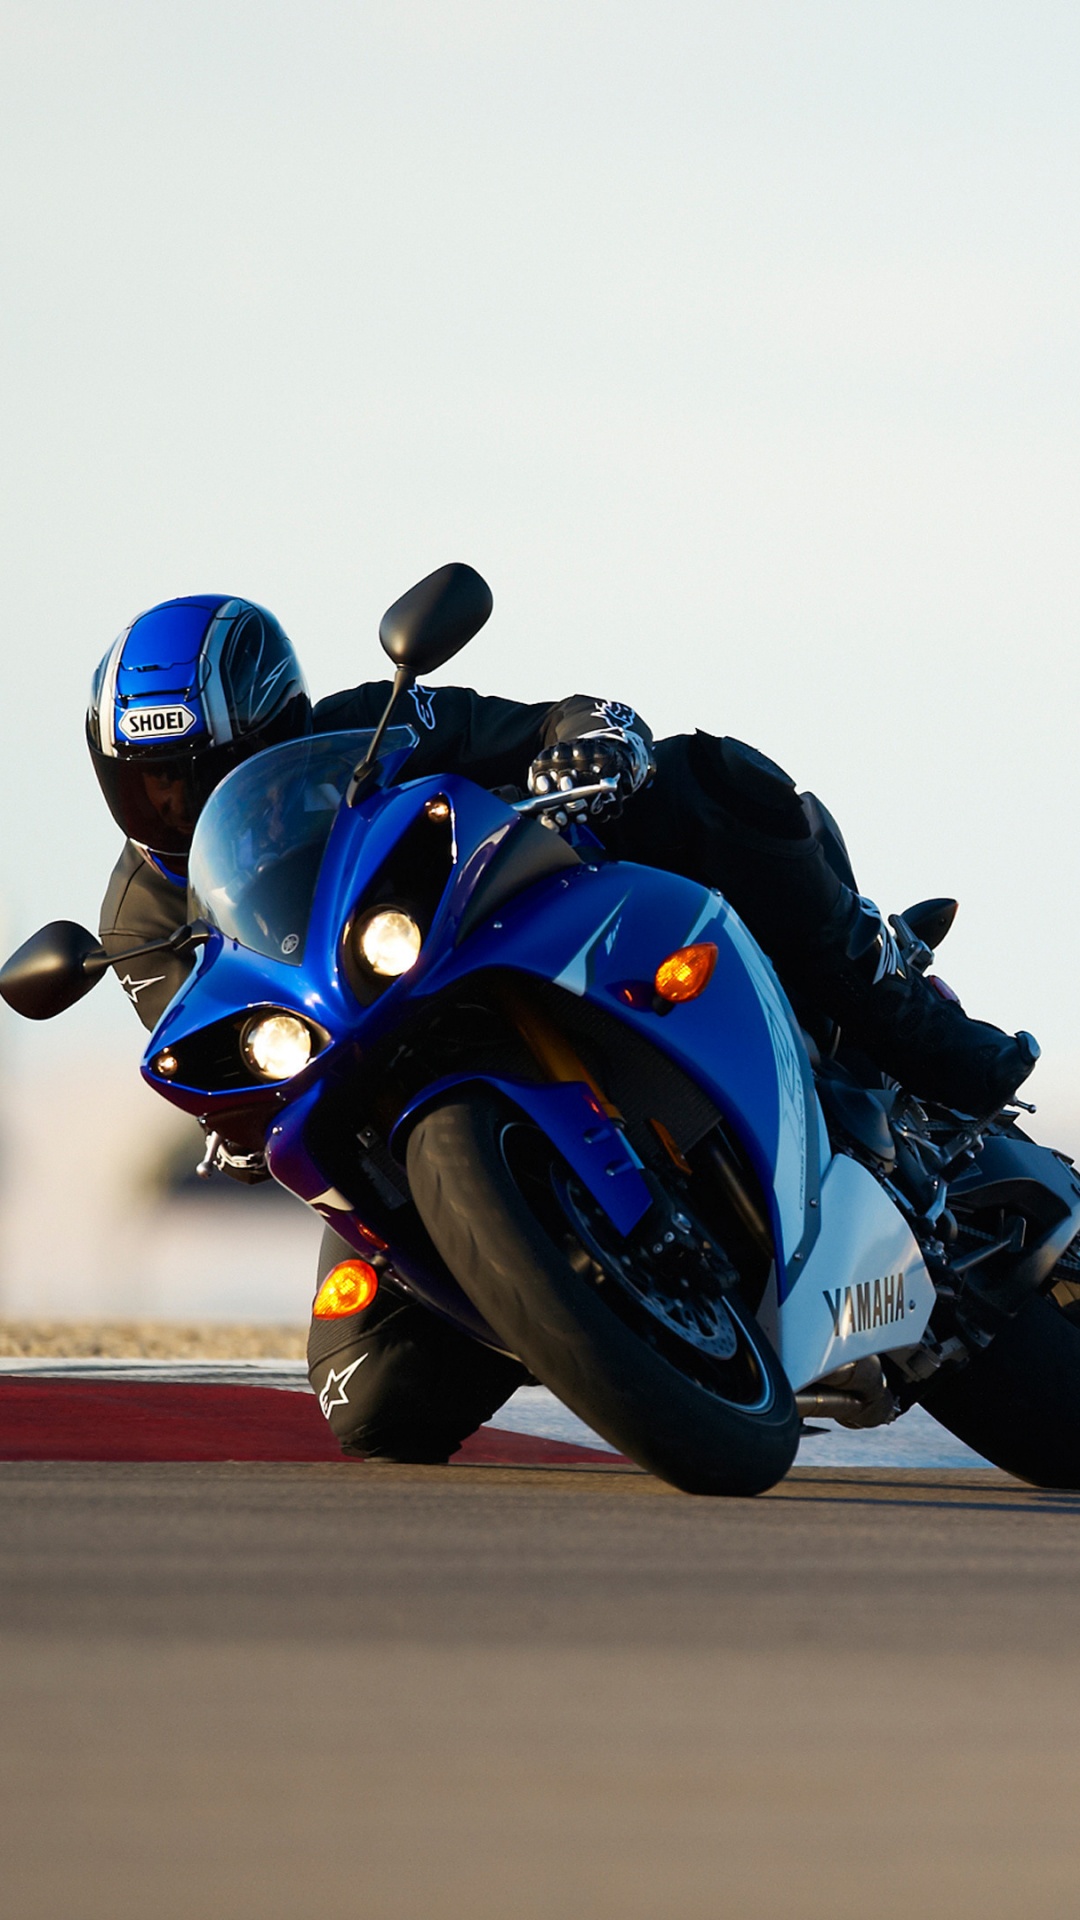 Blue and Black Sports Bike on Road During Daytime. Wallpaper in 1080x1920 Resolution